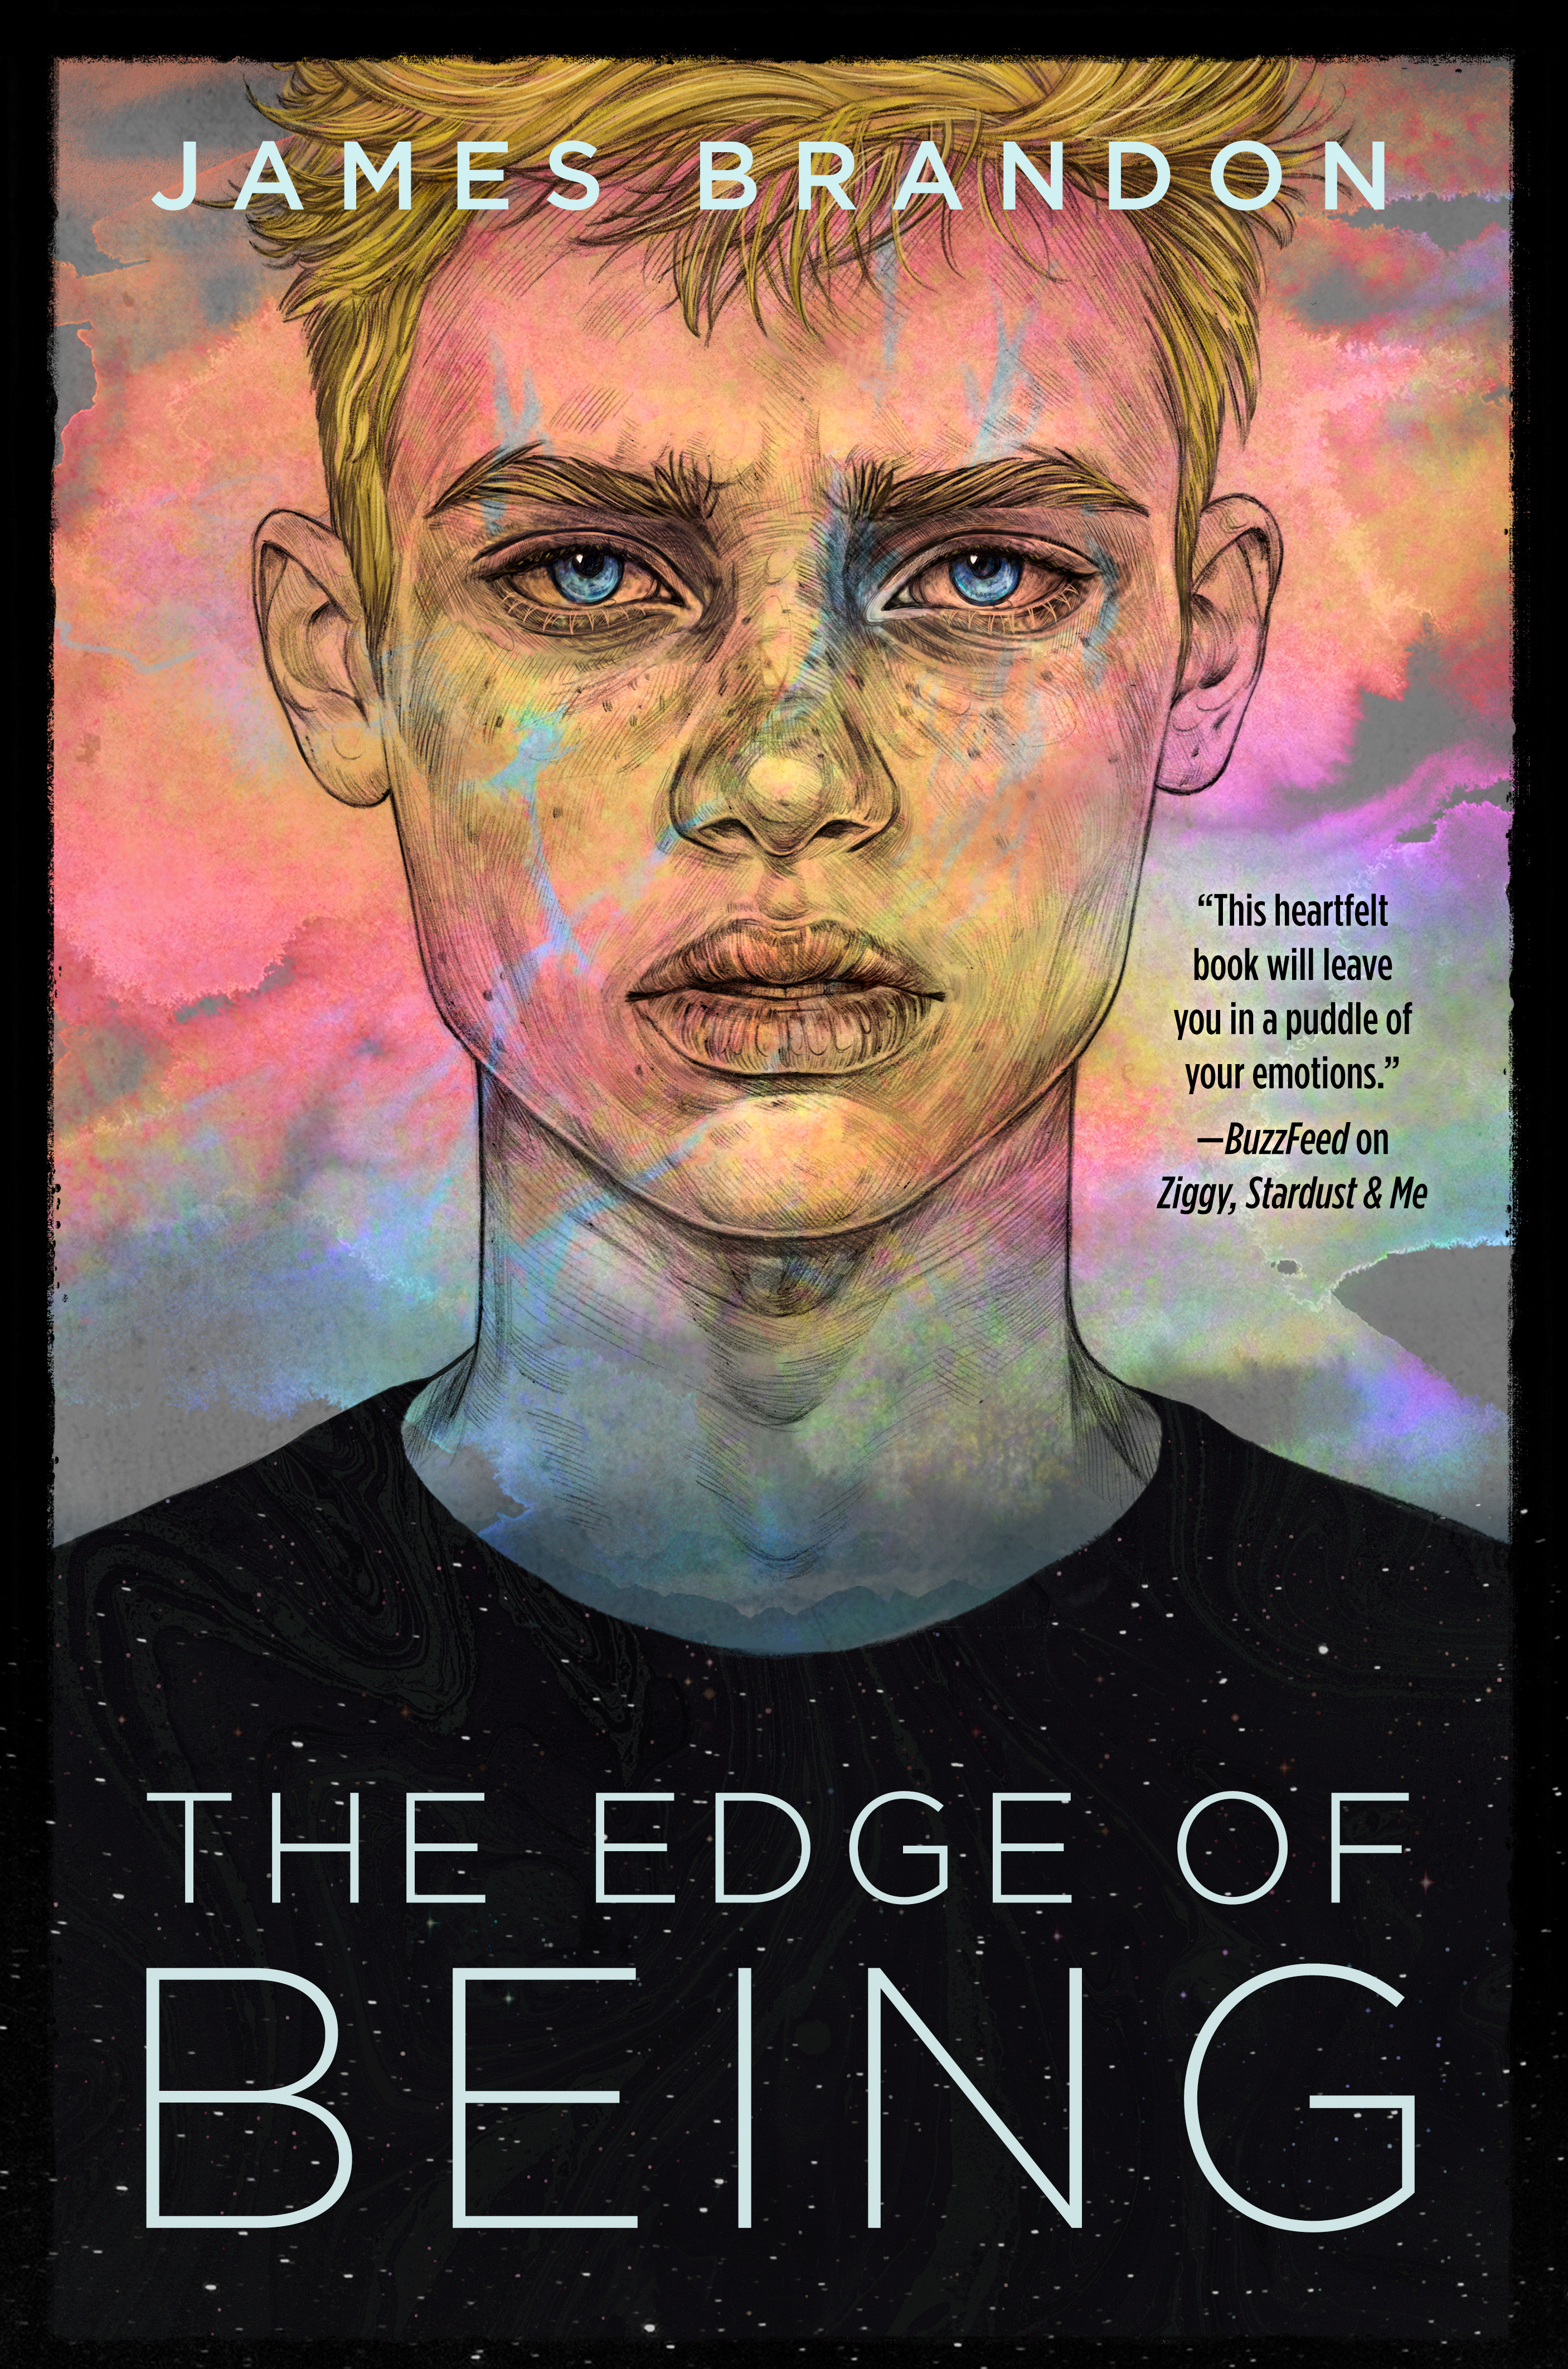 The Edge Of Being (Hardcover Book)